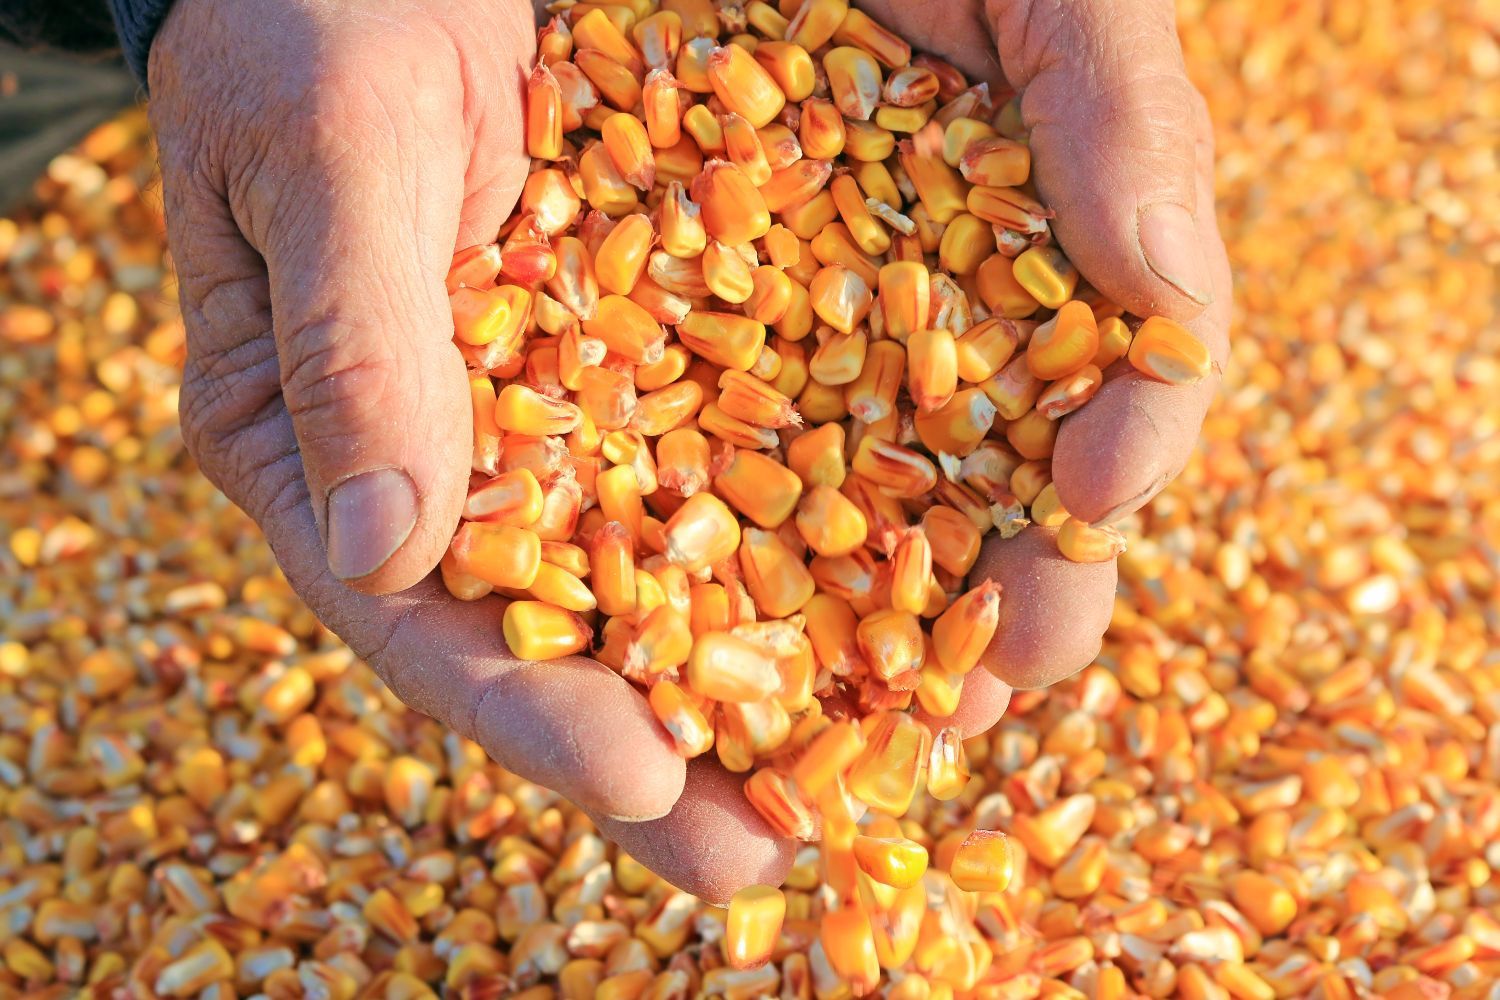 Brazil, China conclude key negotiations on starting corn trade